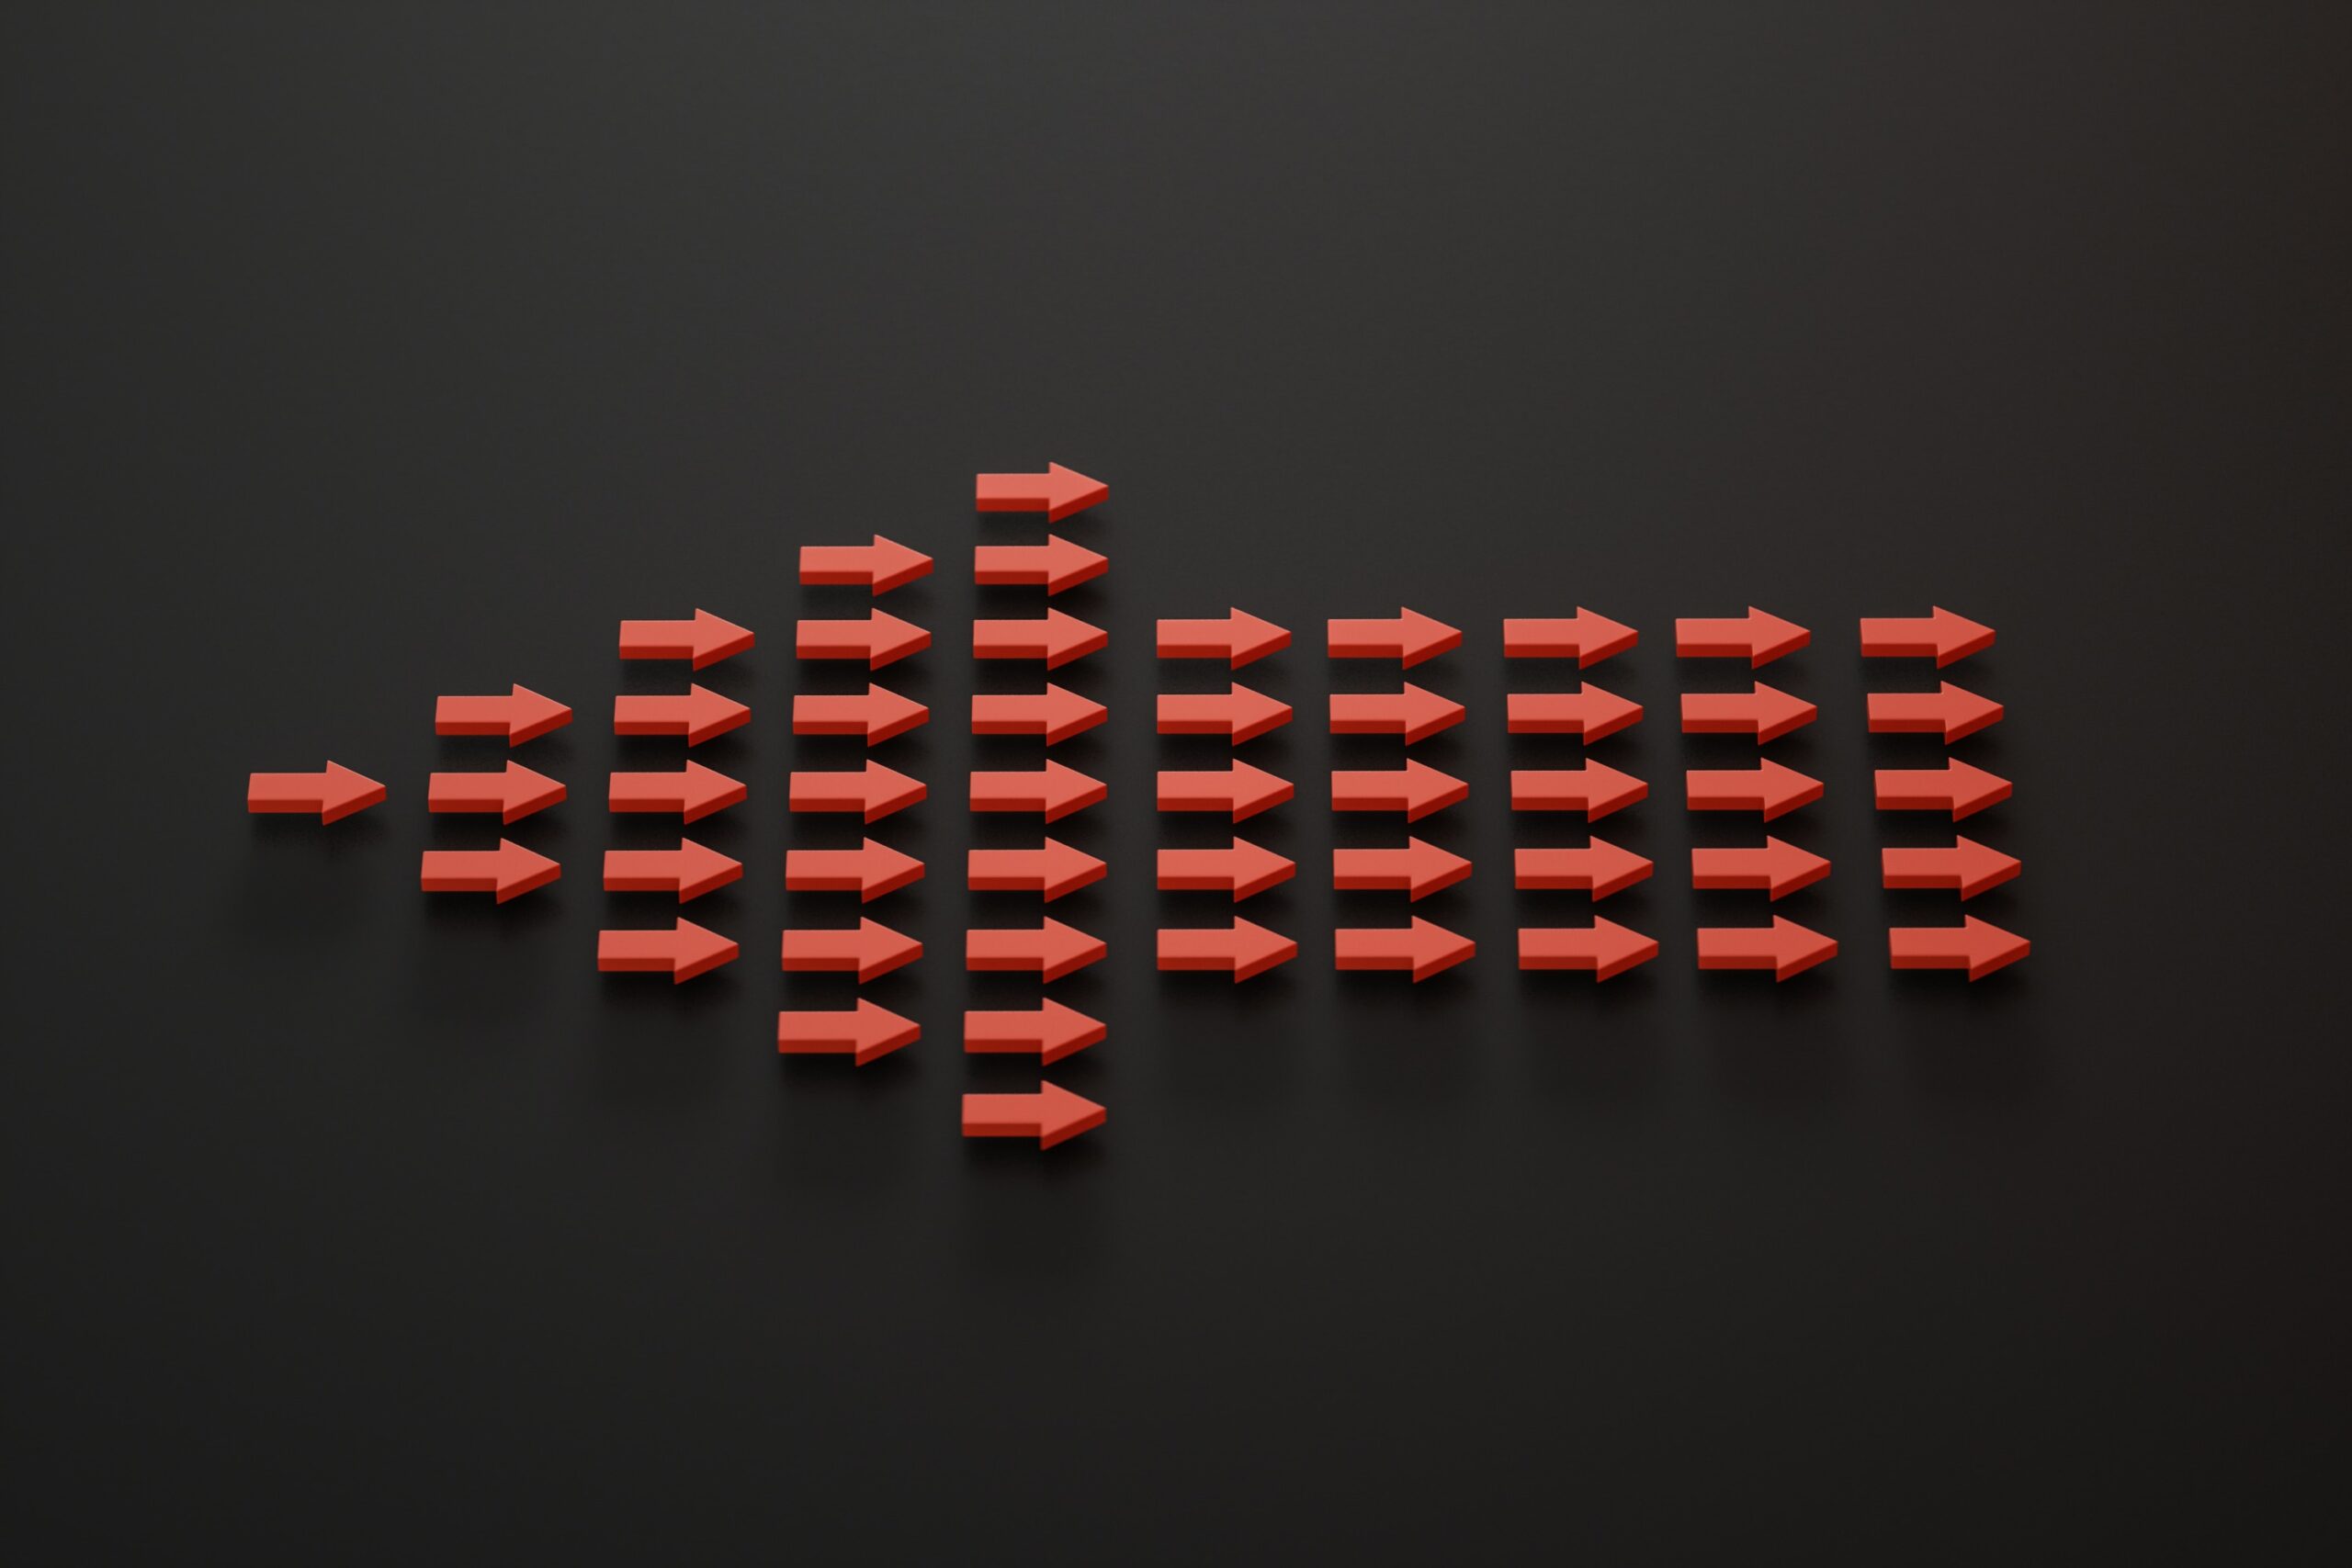 A group of red arrows on a black surface photo. Each individual arrow is pointed to right, but they as a whole shape a big arrow that points to left.